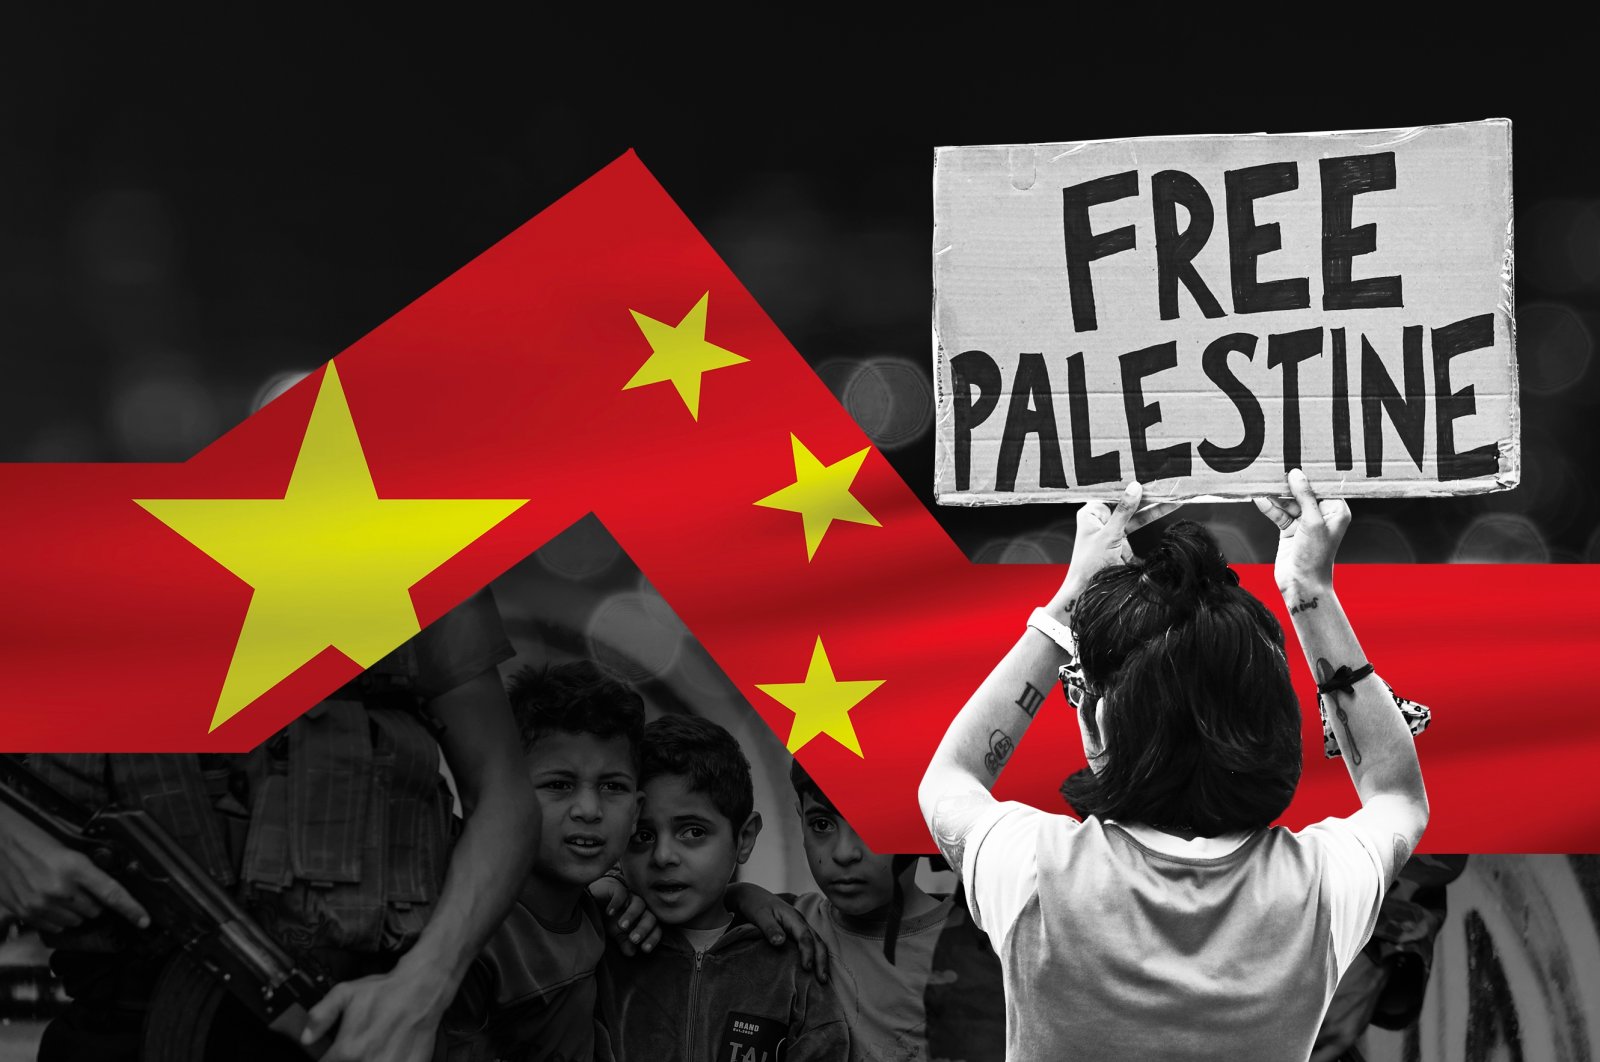 A photo illustration by Daily Sabah&#039;s Büşra Öztürk shows a protester holding a banner with &quot;Free Palestine&quot; as the Chinese flag is seen in the background.